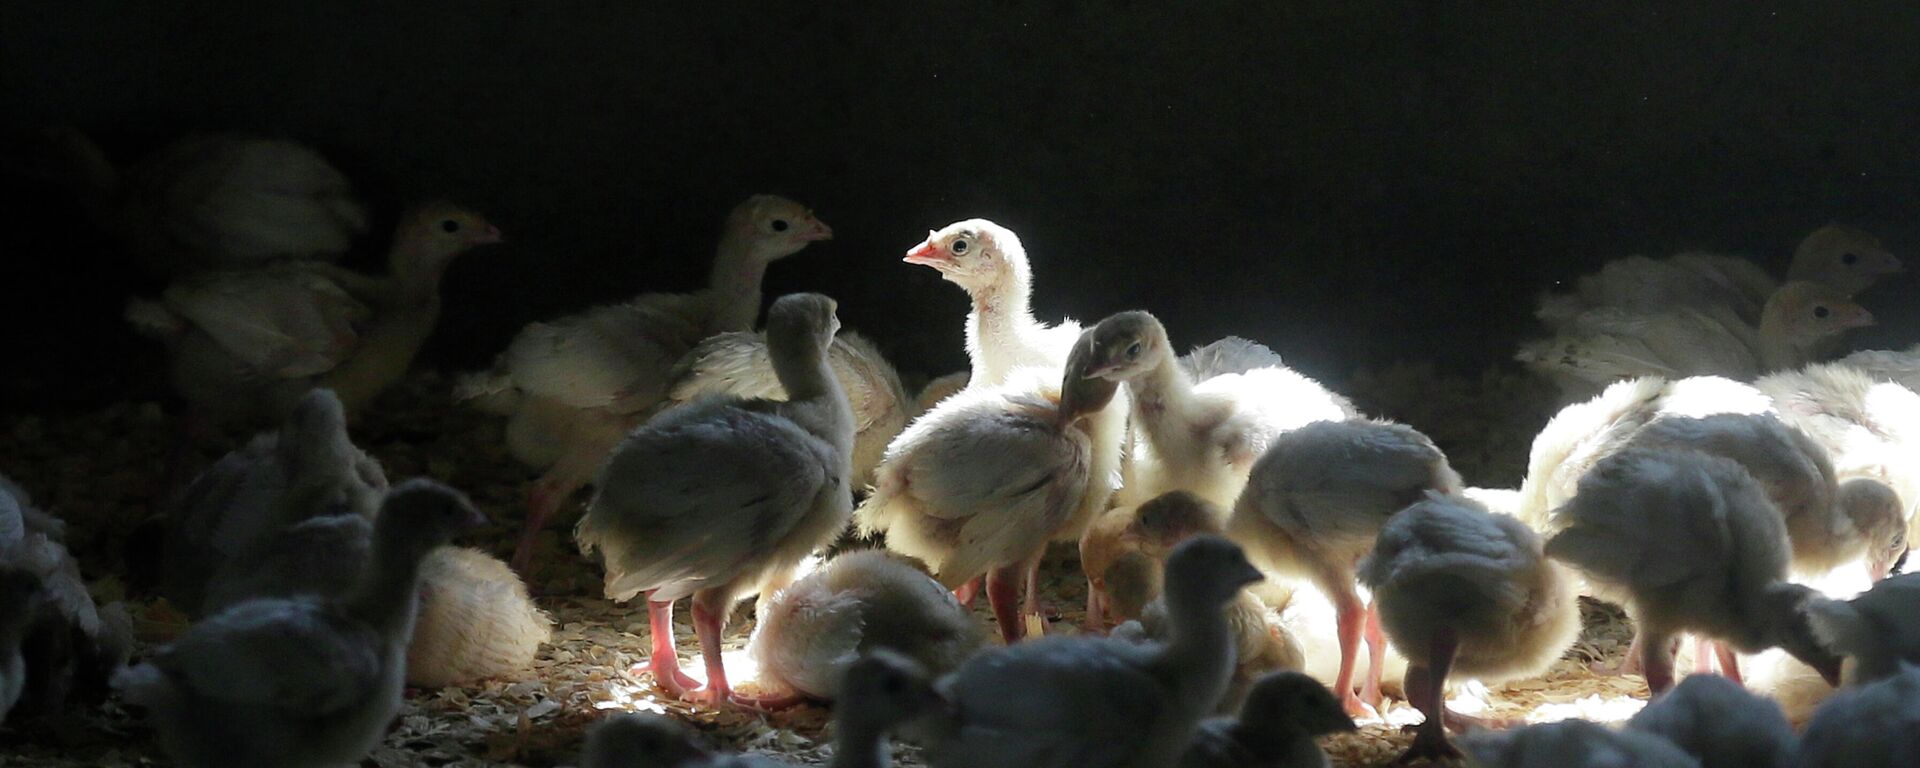 A flock of young turkeys stand in a barn at the Moline family turkey farm after the Mason, Iowa farm was restocked on Aug. 10, 2015. Farms that raise turkeys and chickens for meat and eggs are on high alert, fearing a repeat of a widespread bird flu outbreak in 2015 that killed 50 million birds across 15 states and cost the federal government nearly $1 billion. The new fear is driven by the discovery announced Feb. 9, 2022, of the virus infecting a commercial turkey flock in Indiana. - Sputnik International, 1920, 21.03.2022